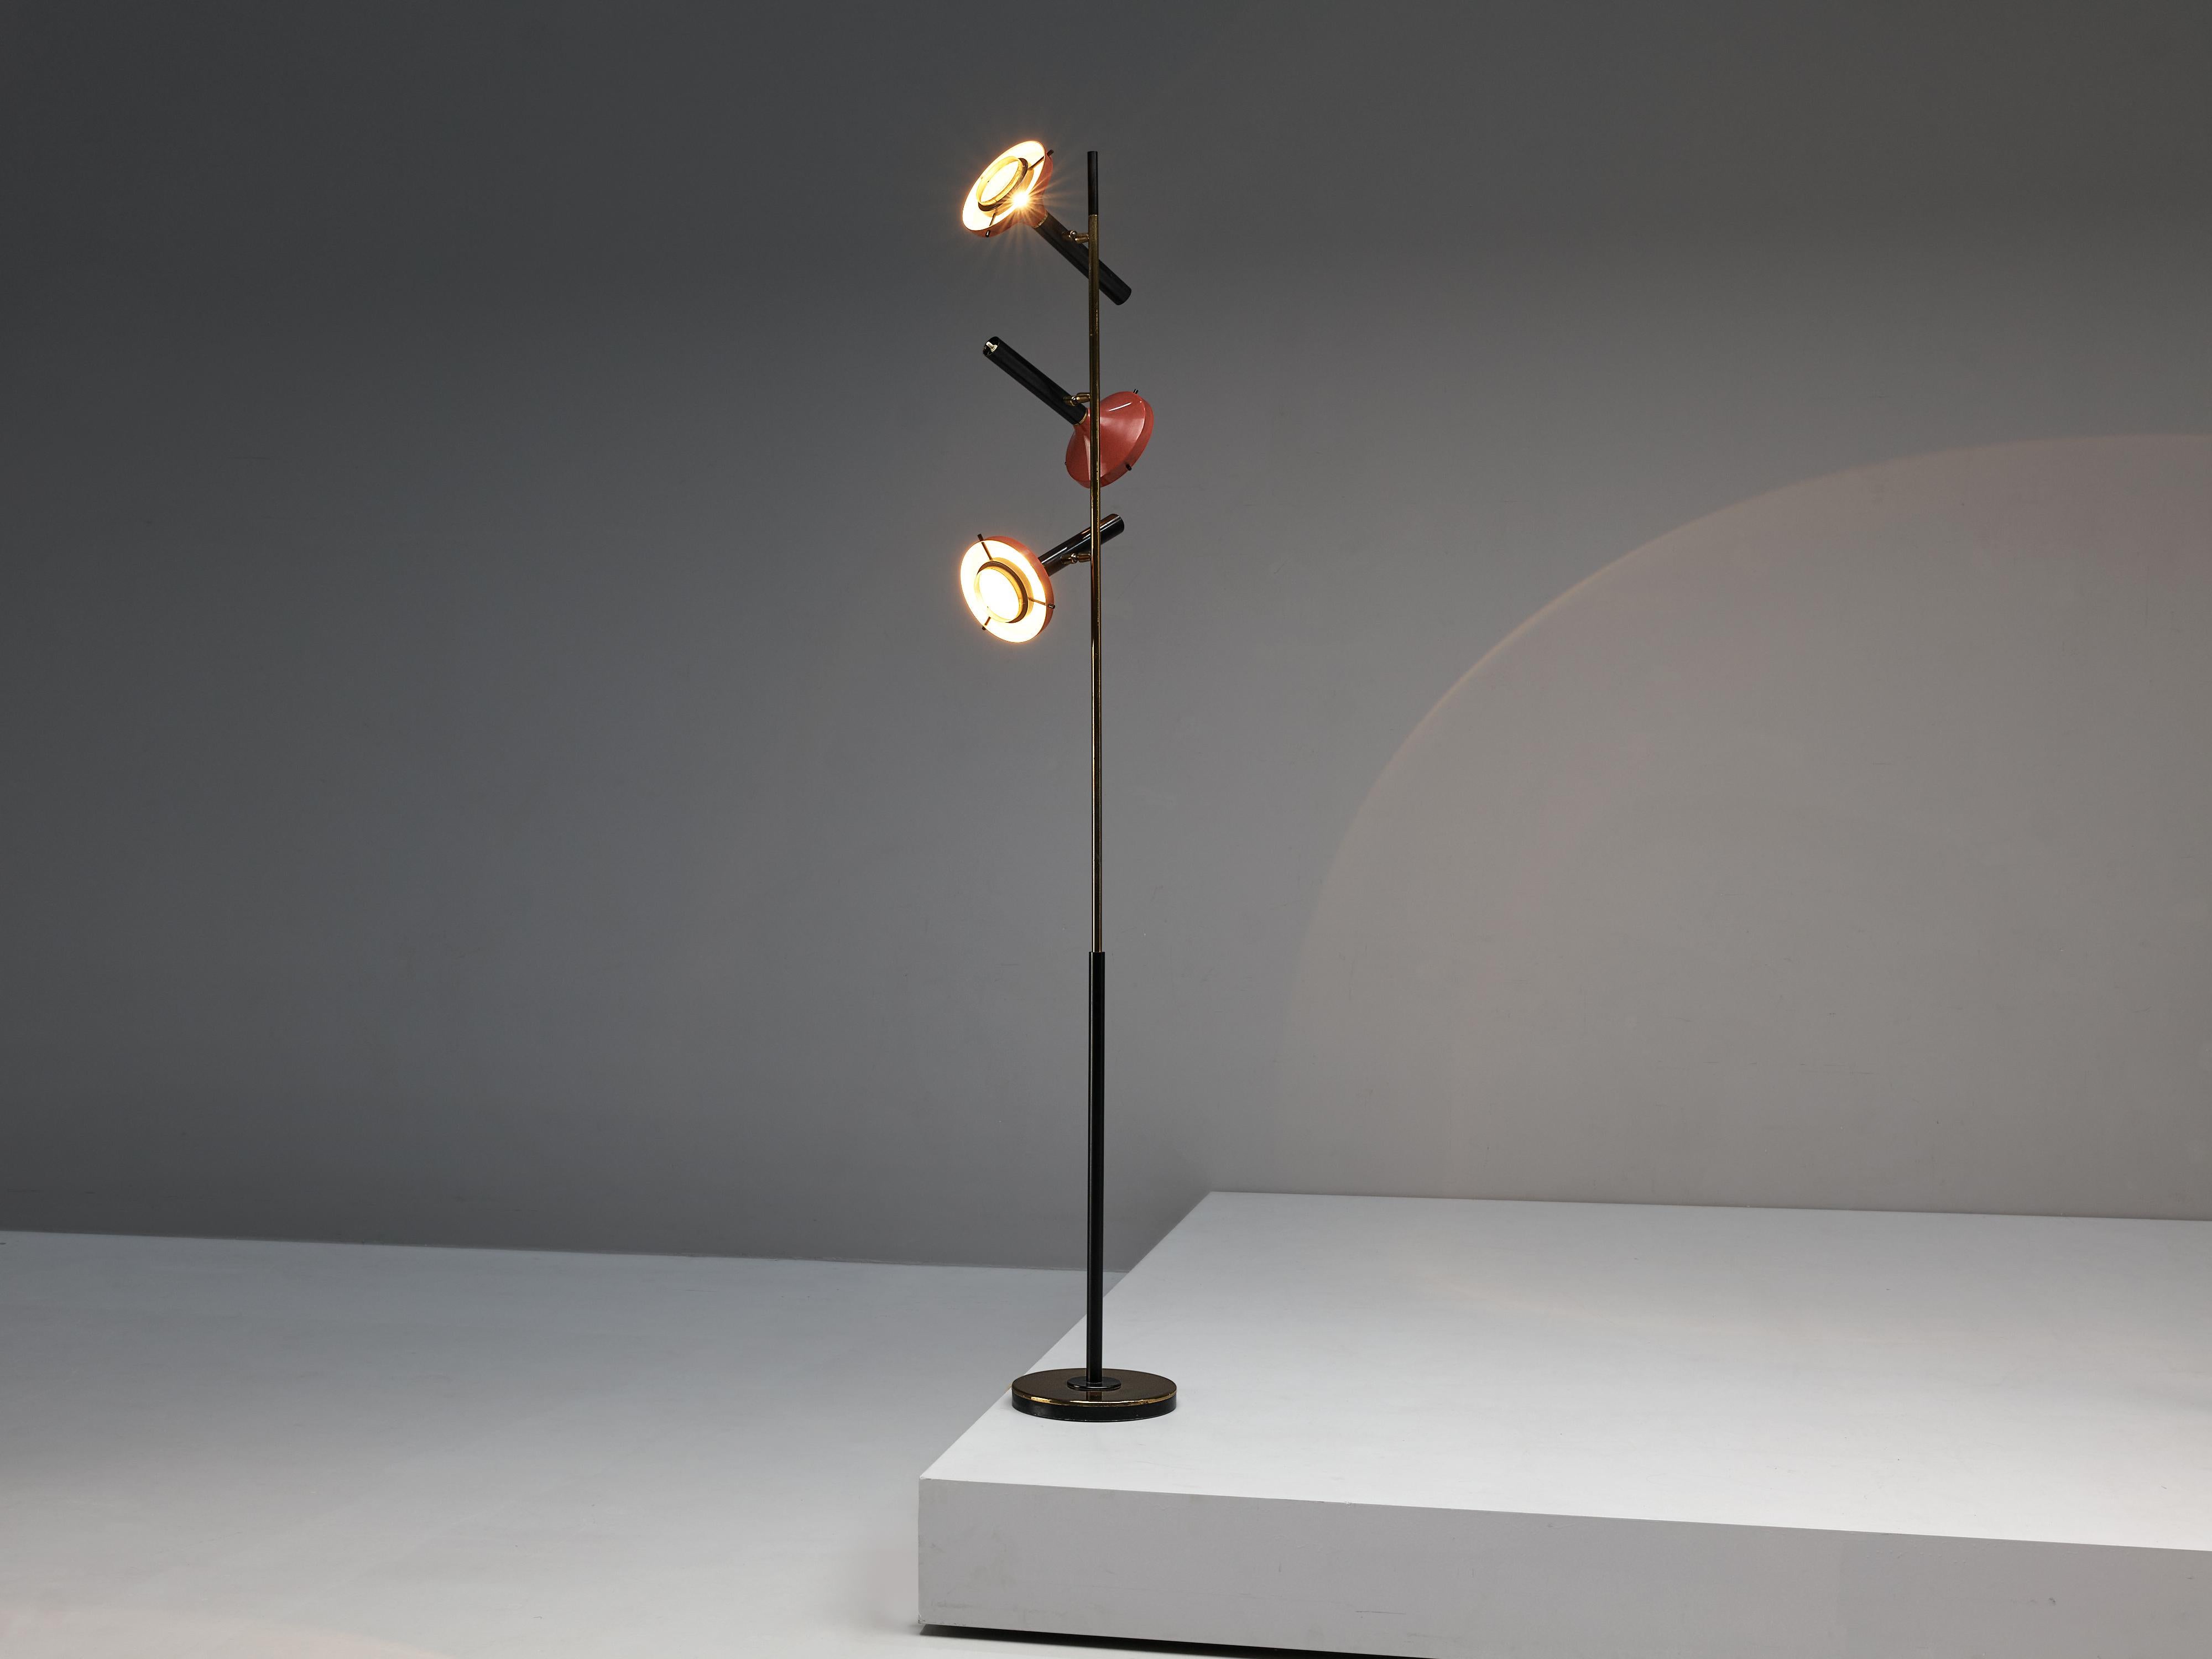 Oscar Torlasco for Lumi, floor lamp, cast iron, brass, aluminum, glass, Italy, circa 1958

Refined floor lamp with three black and red shades designed by the Italian designer Oscar Torlasco (1934-2004). The lamp consists of a round base from which